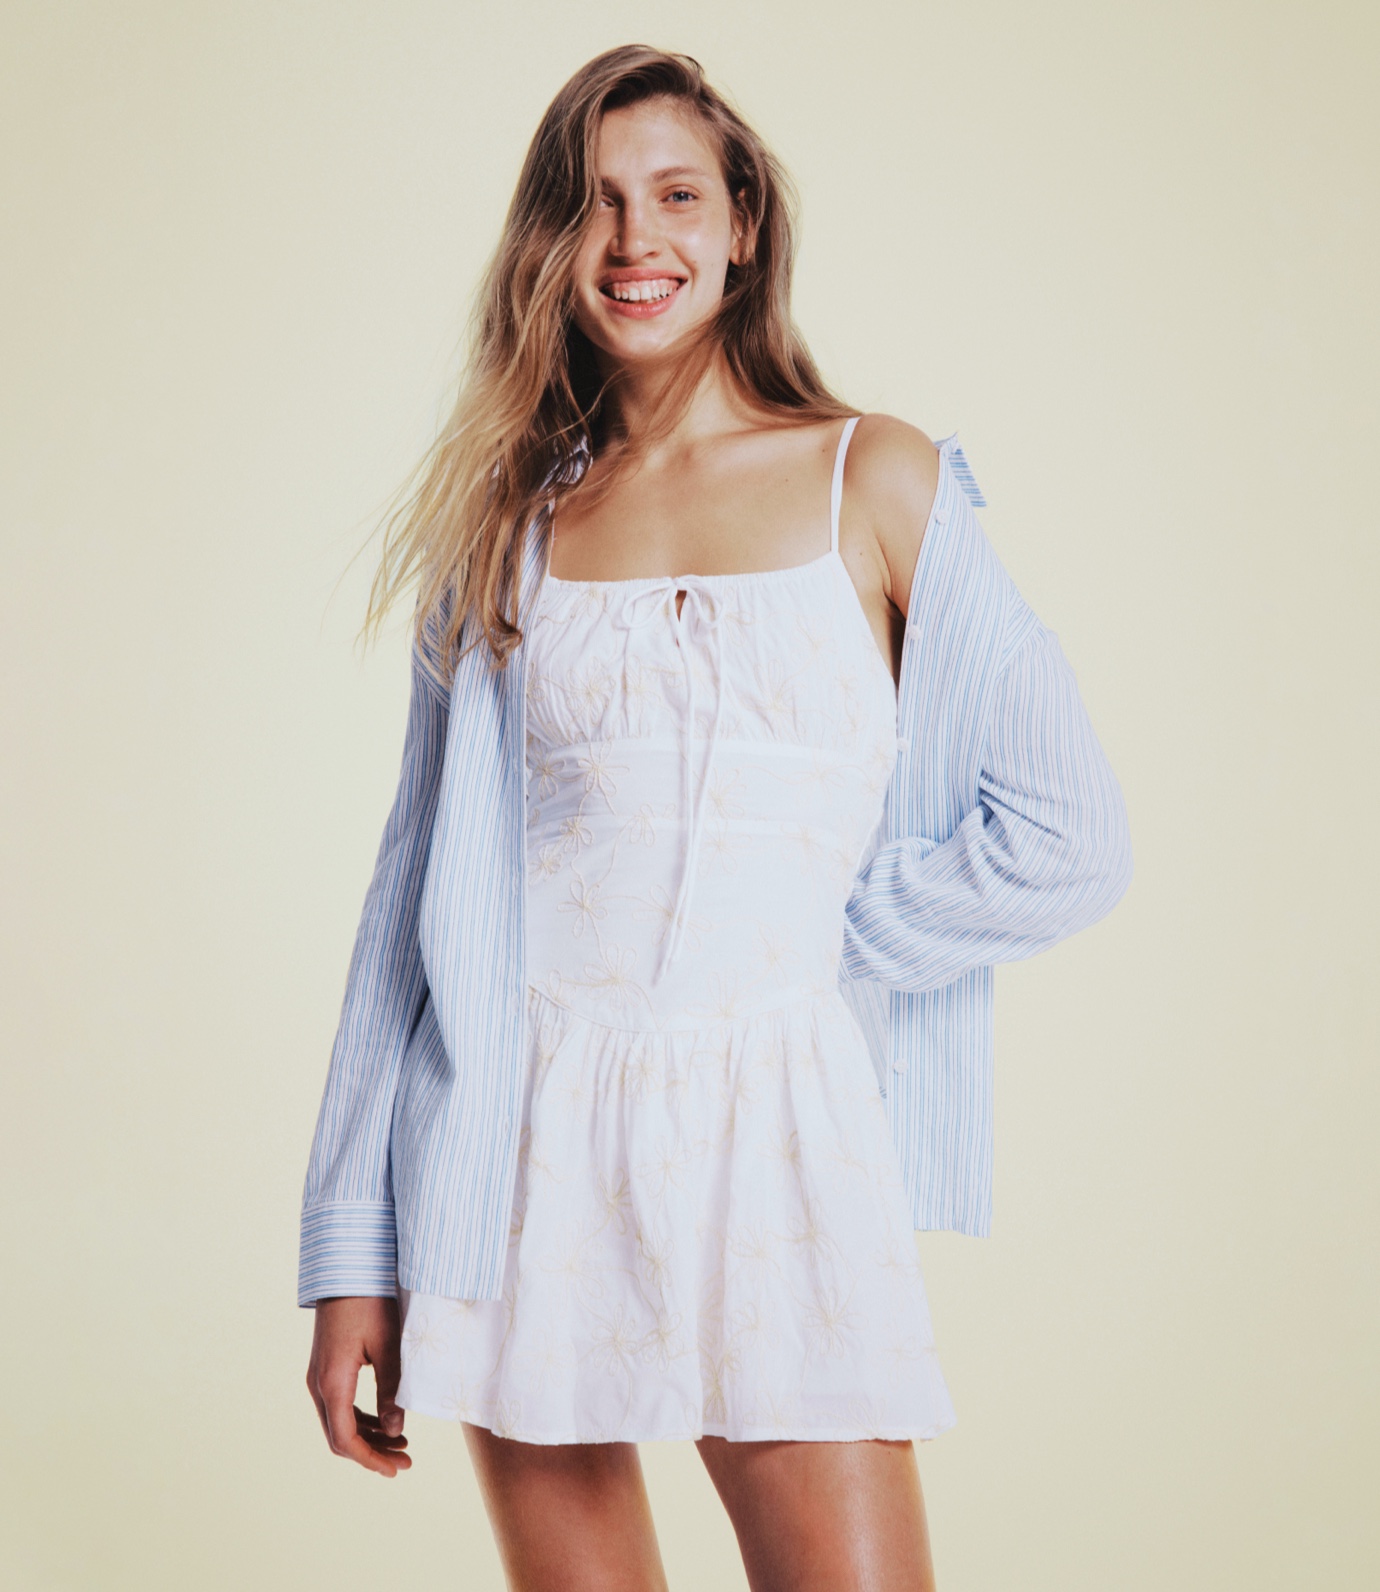 Dreamy looks. Shop new arrivals now.